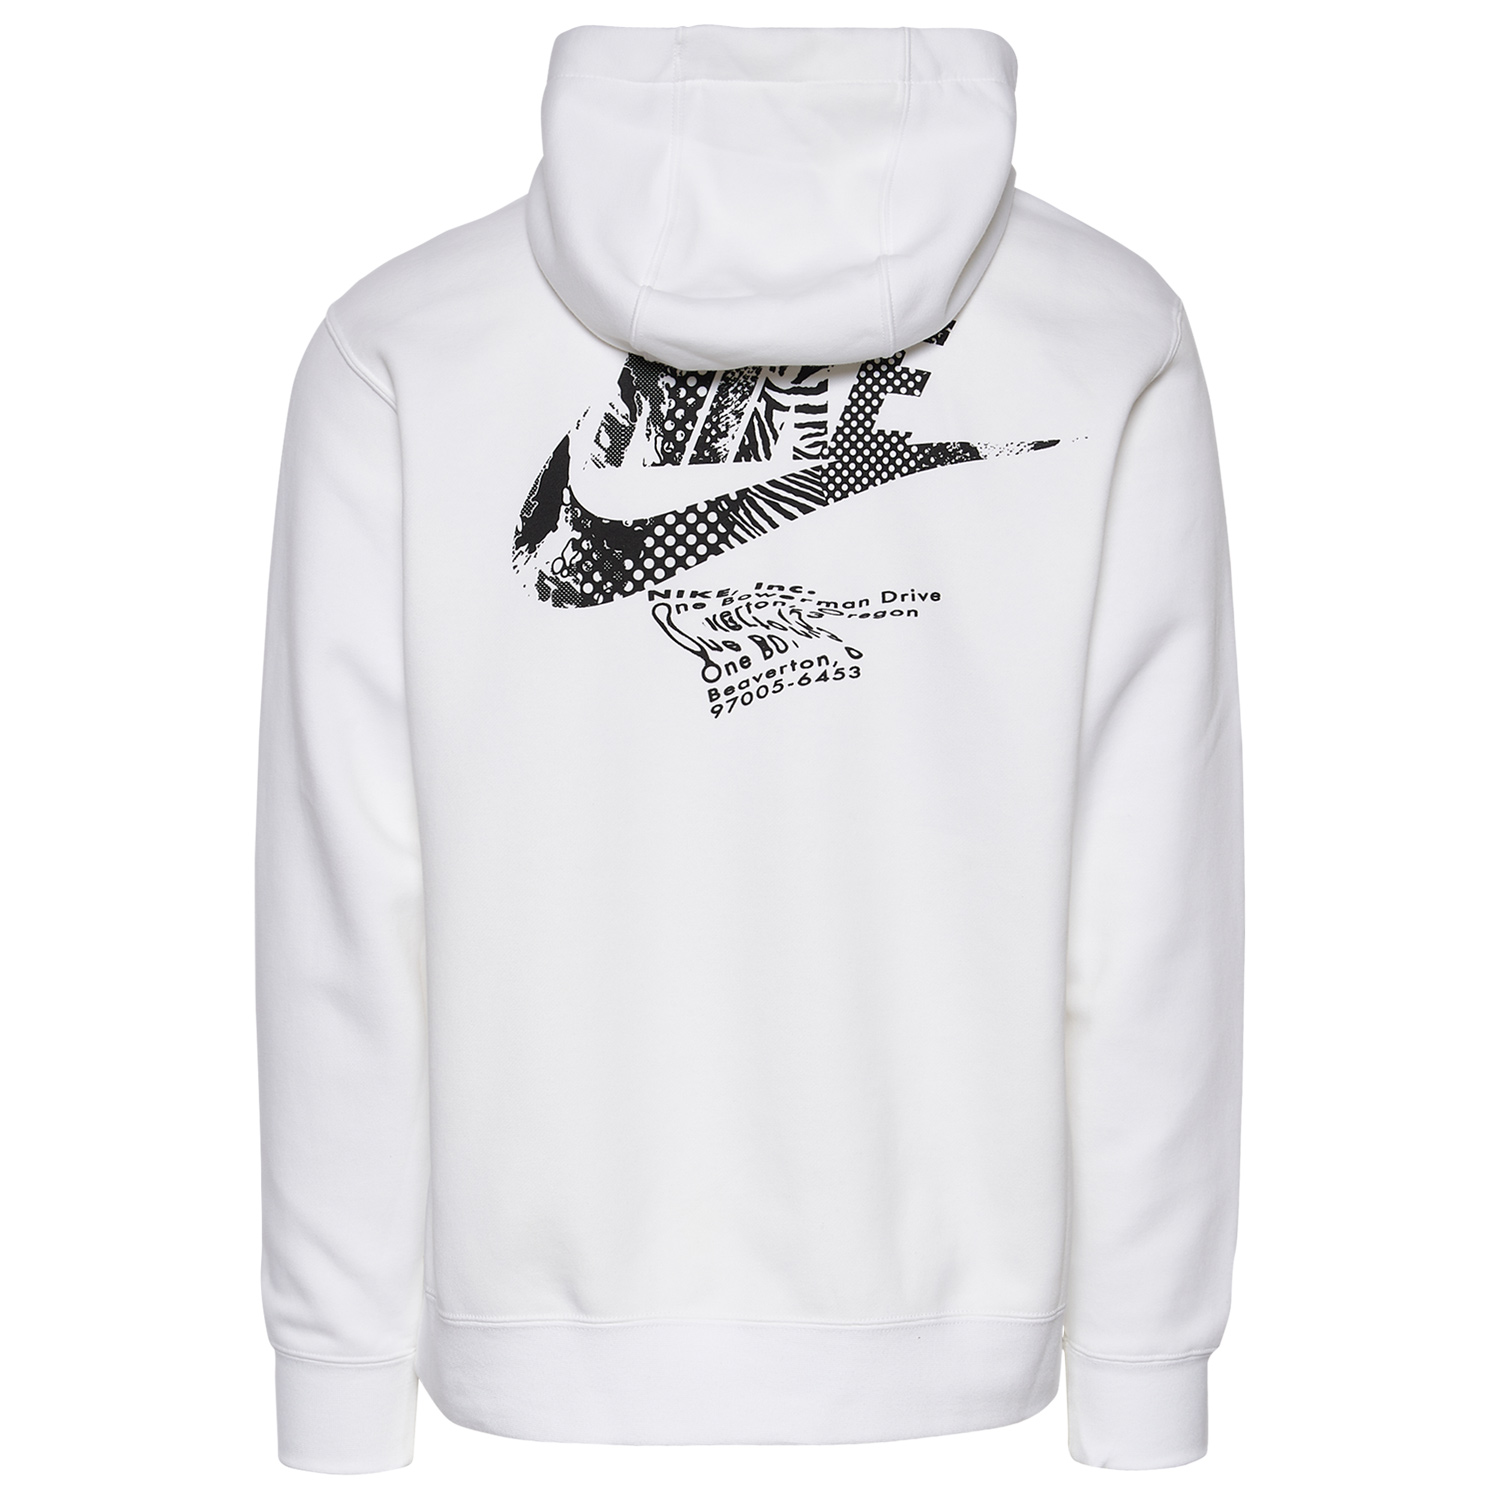 nike-alter-and-reveal-hoodie-white-black-2